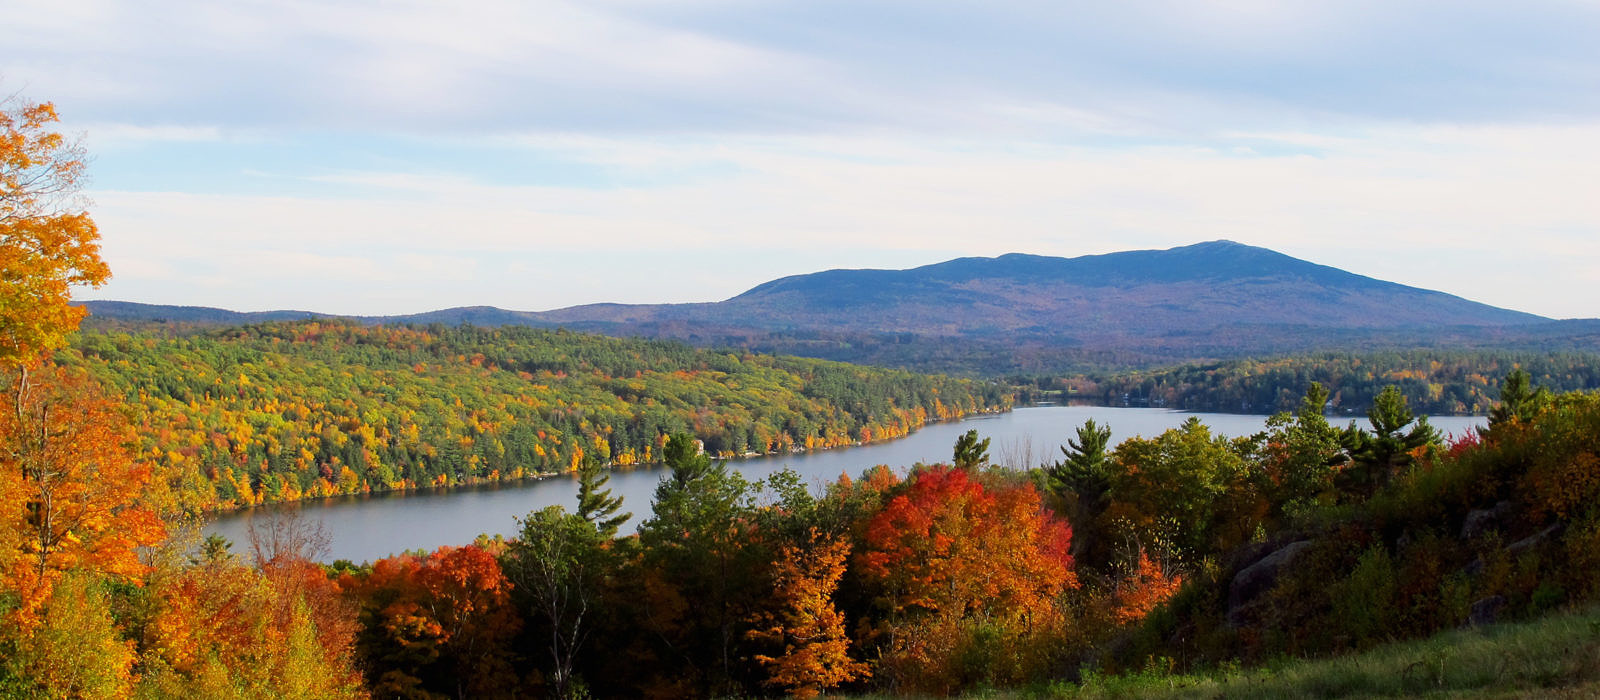 An autumn view of Silver Lake, with Mount Monadnock in the background. (photo © Brett Amy Thelen)